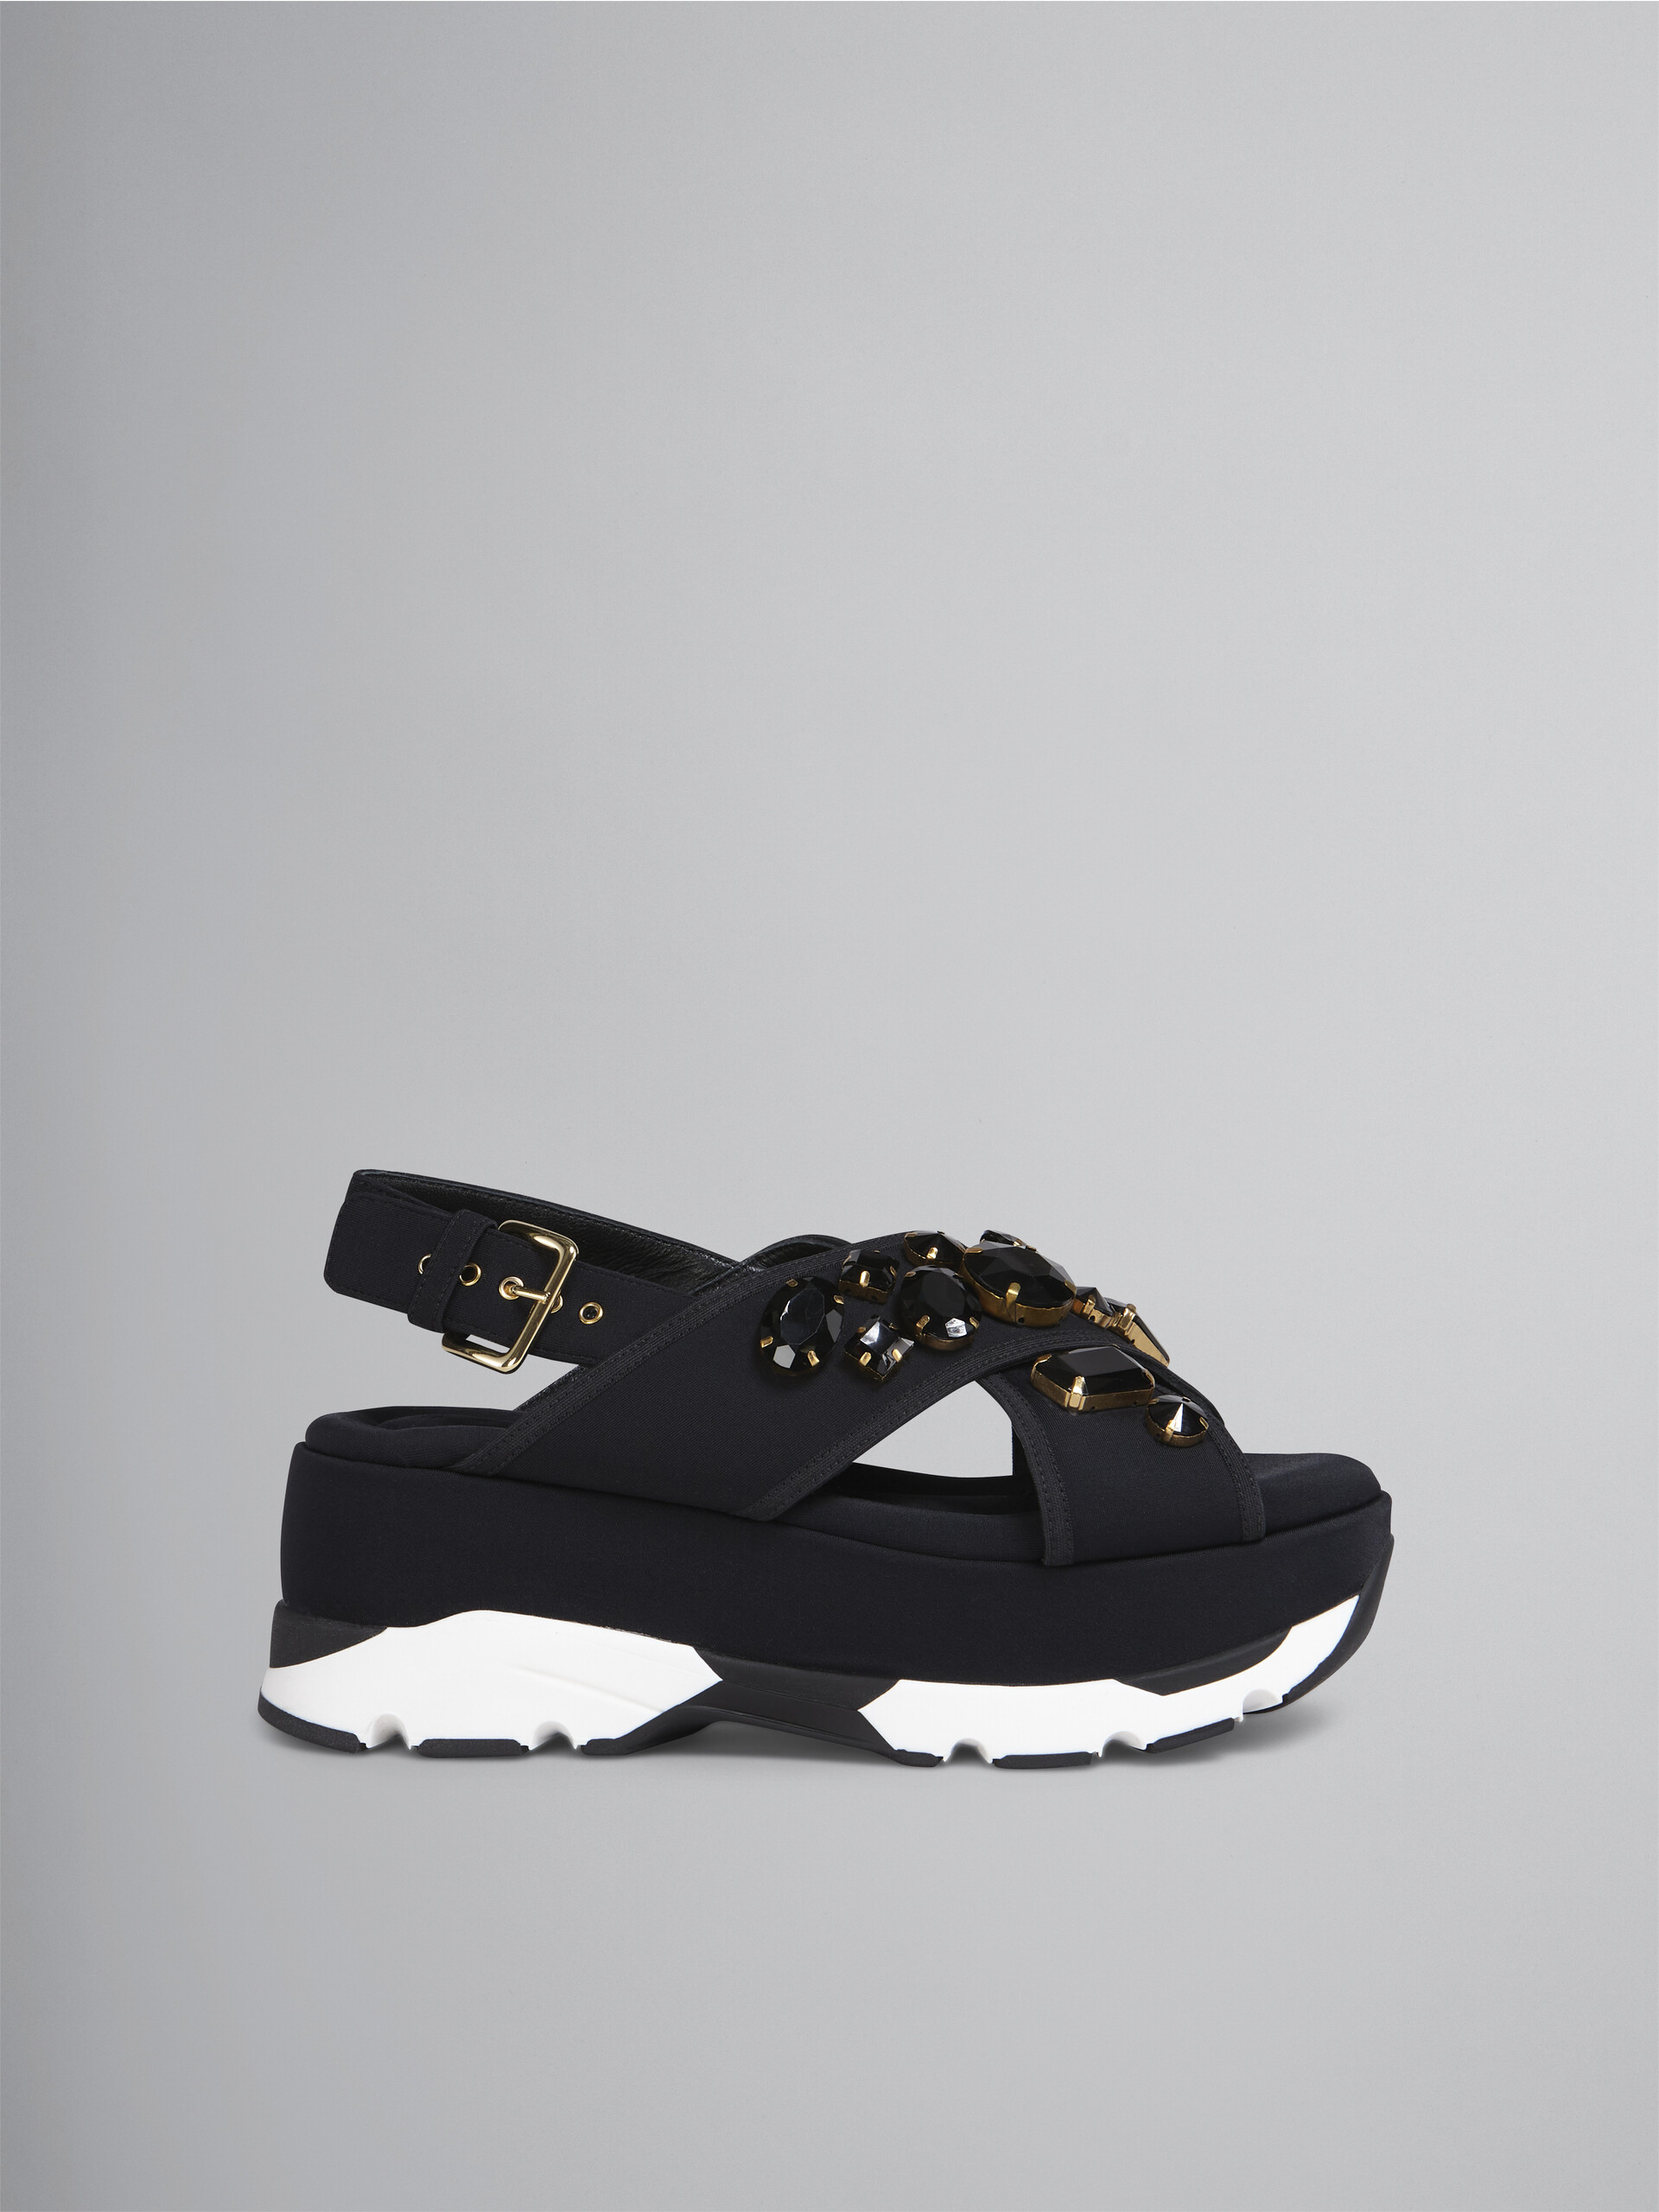 Black wedge in technical fabric - Sandals - Image 1